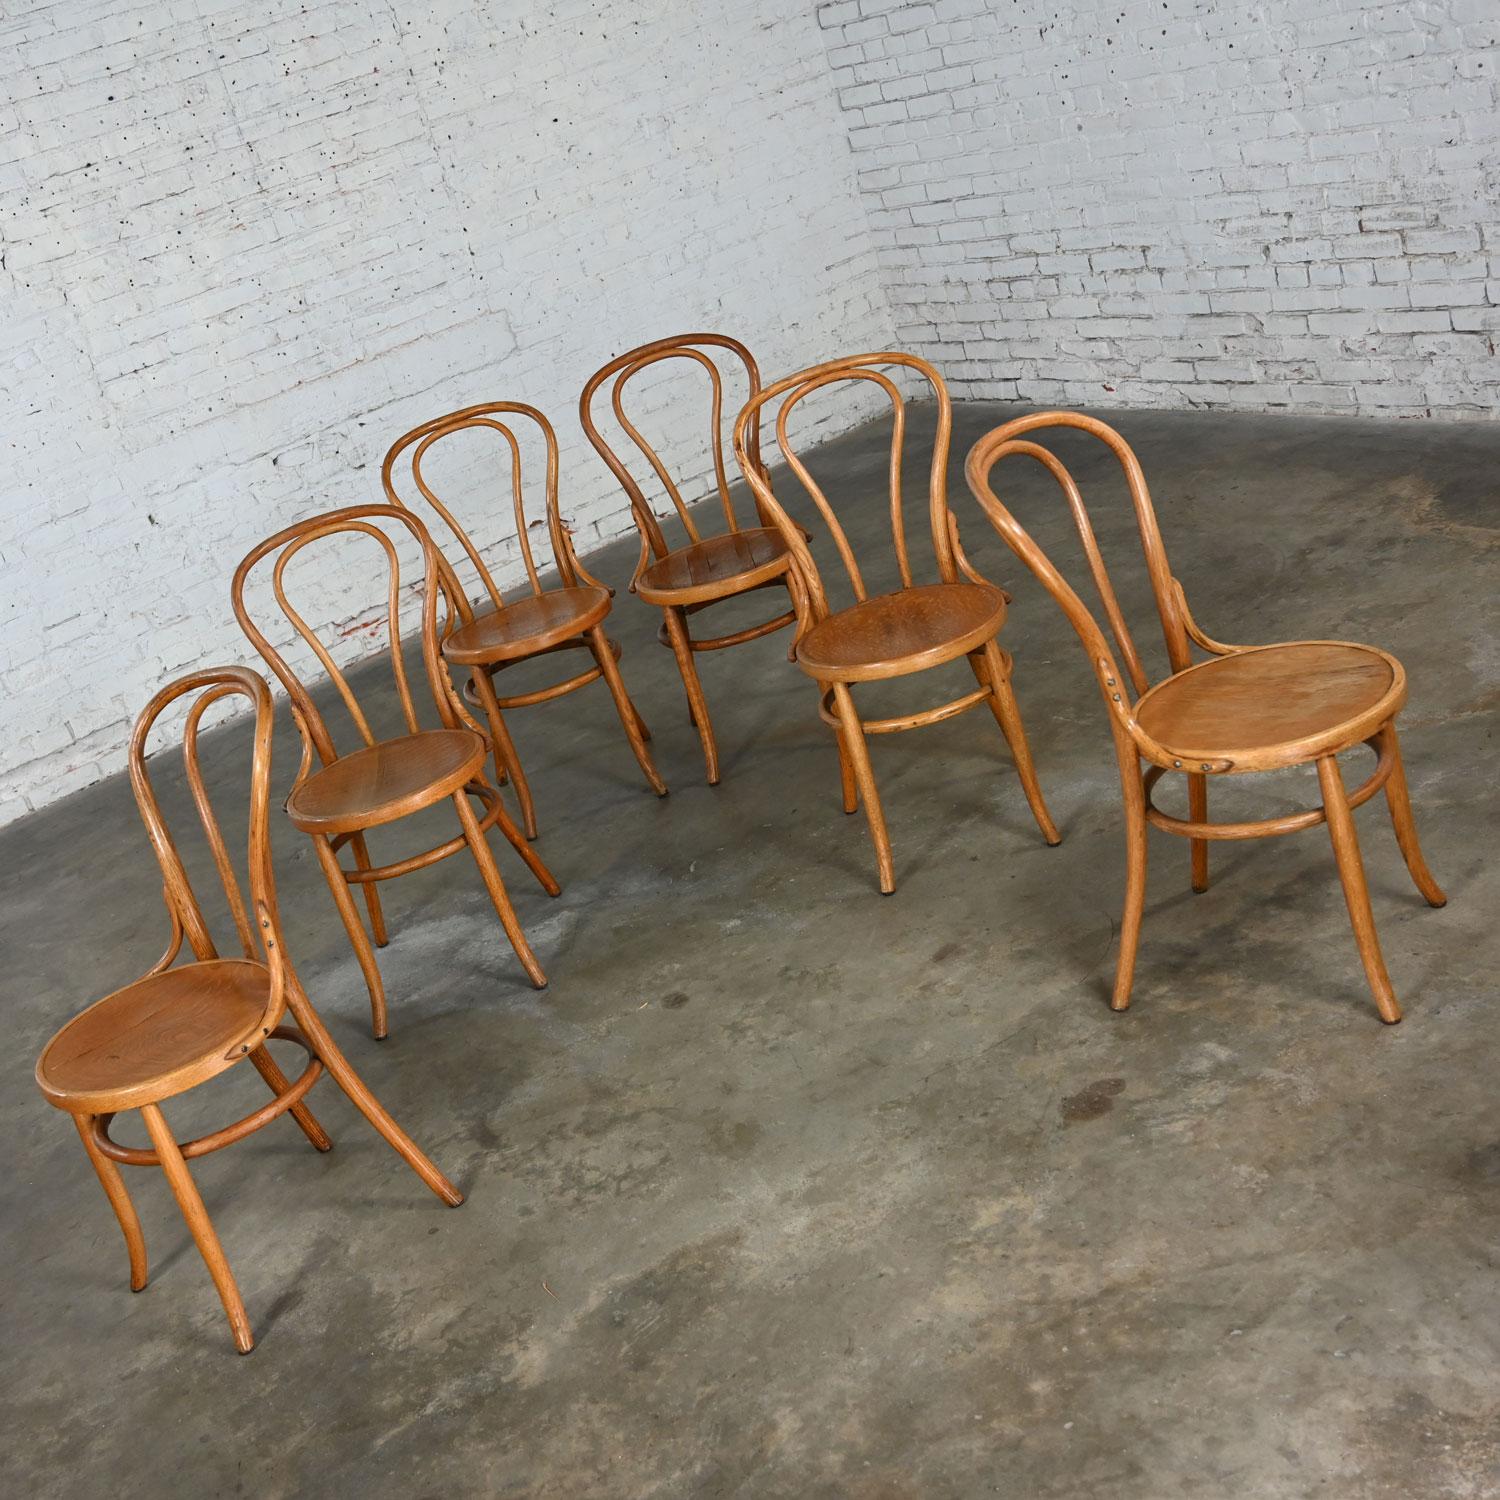 Bauhaus Oak Bentwood Chairs Attributed to Thonet #18 Café Chair Set of 6 In Good Condition For Sale In Topeka, KS